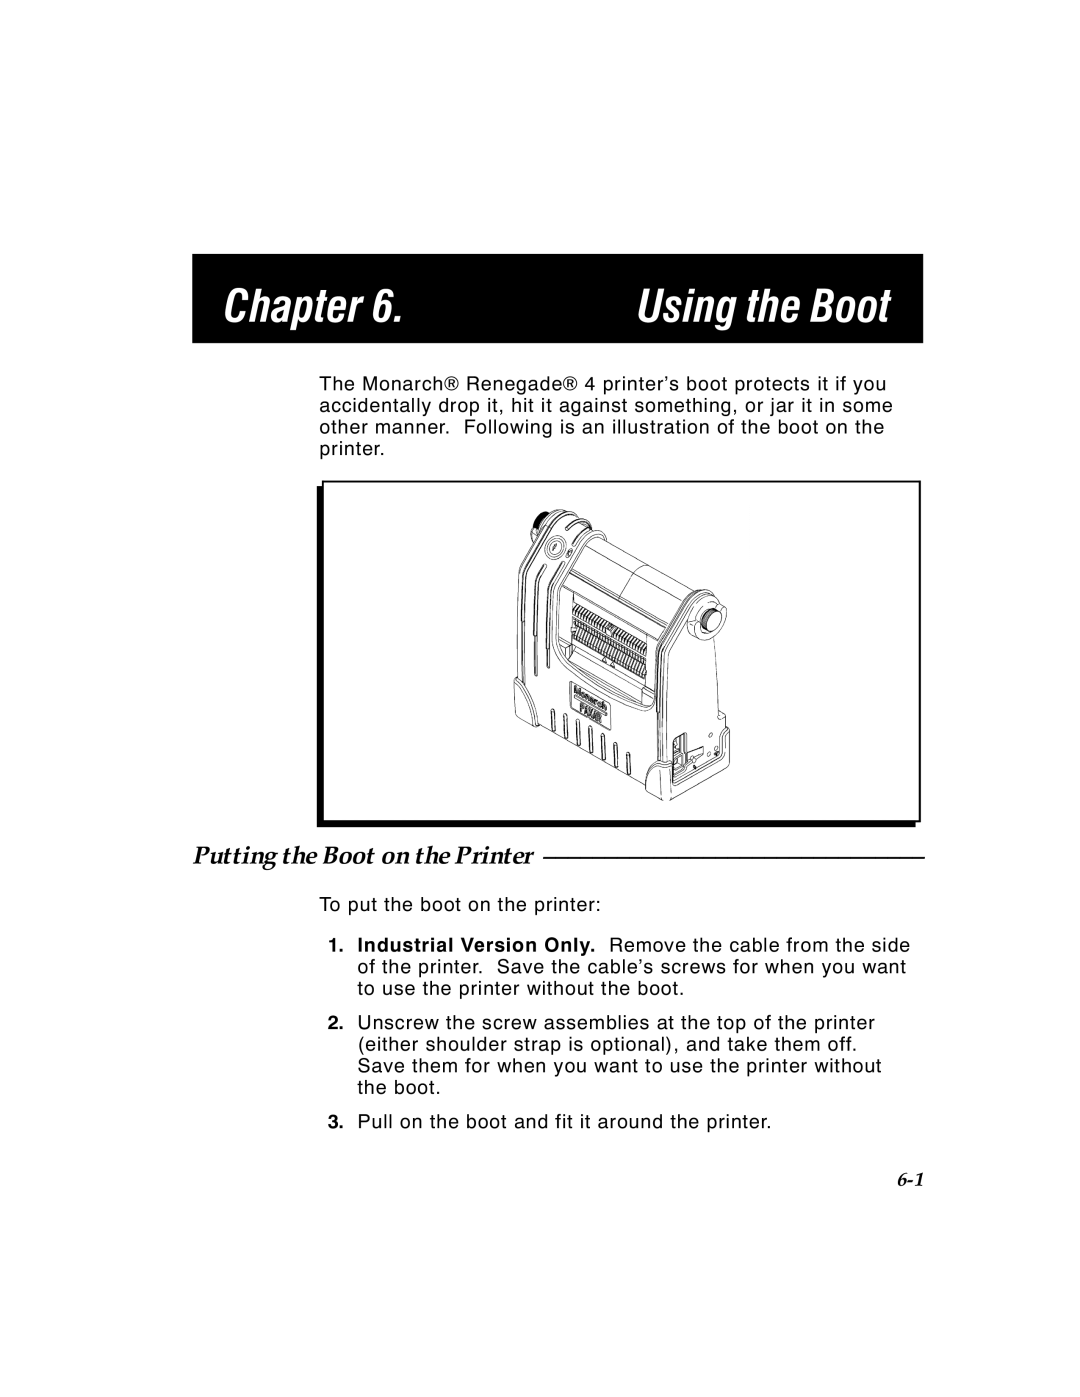 Paxar 4 manual Using the Boot, Putting the Boot on the Printer, Chapter 